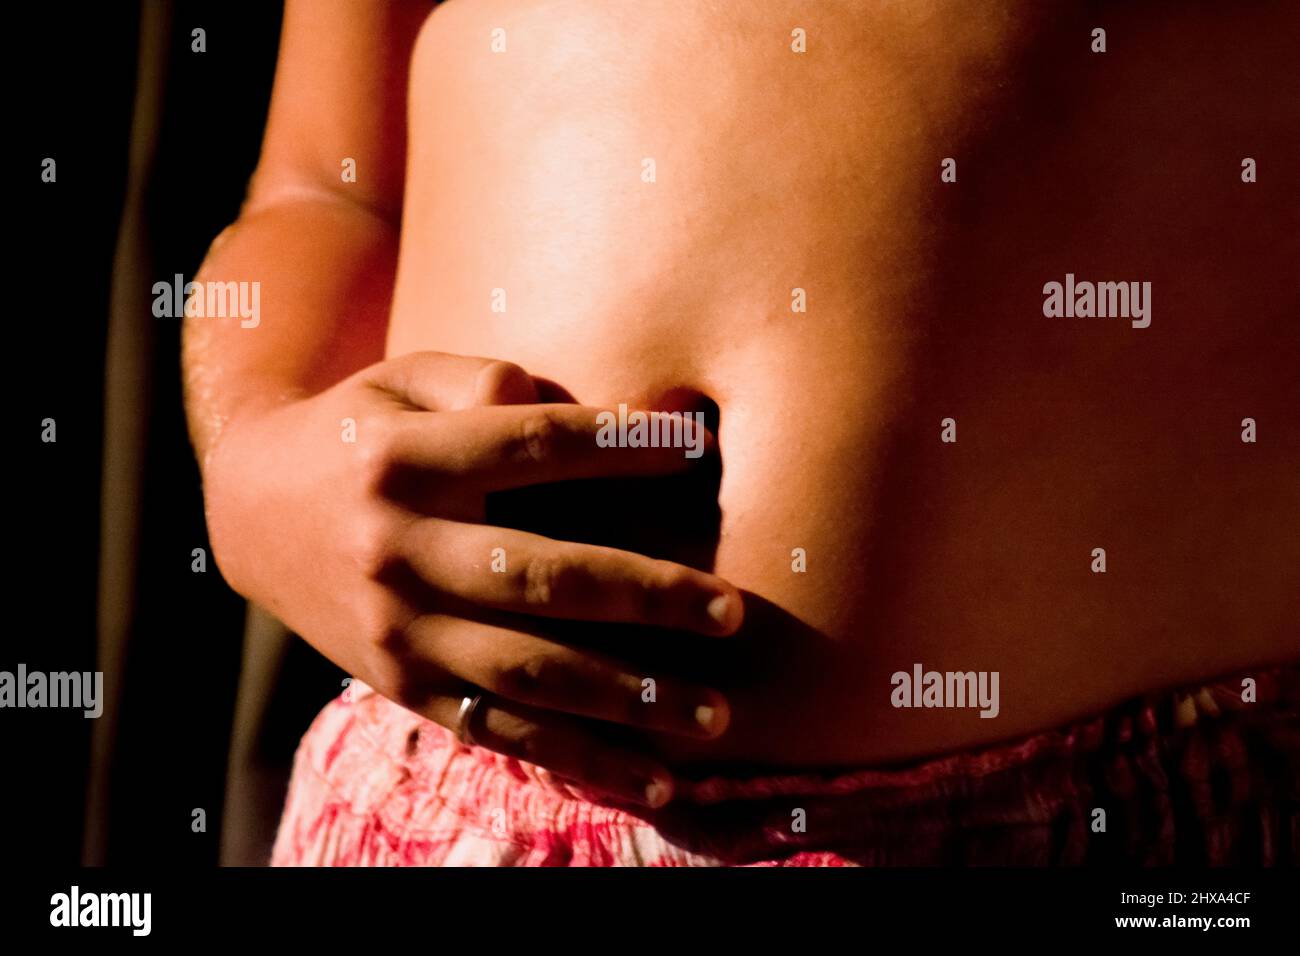 hand touching belly button of pregnant woman. Salvador Bahia Brazil. Stock Photo